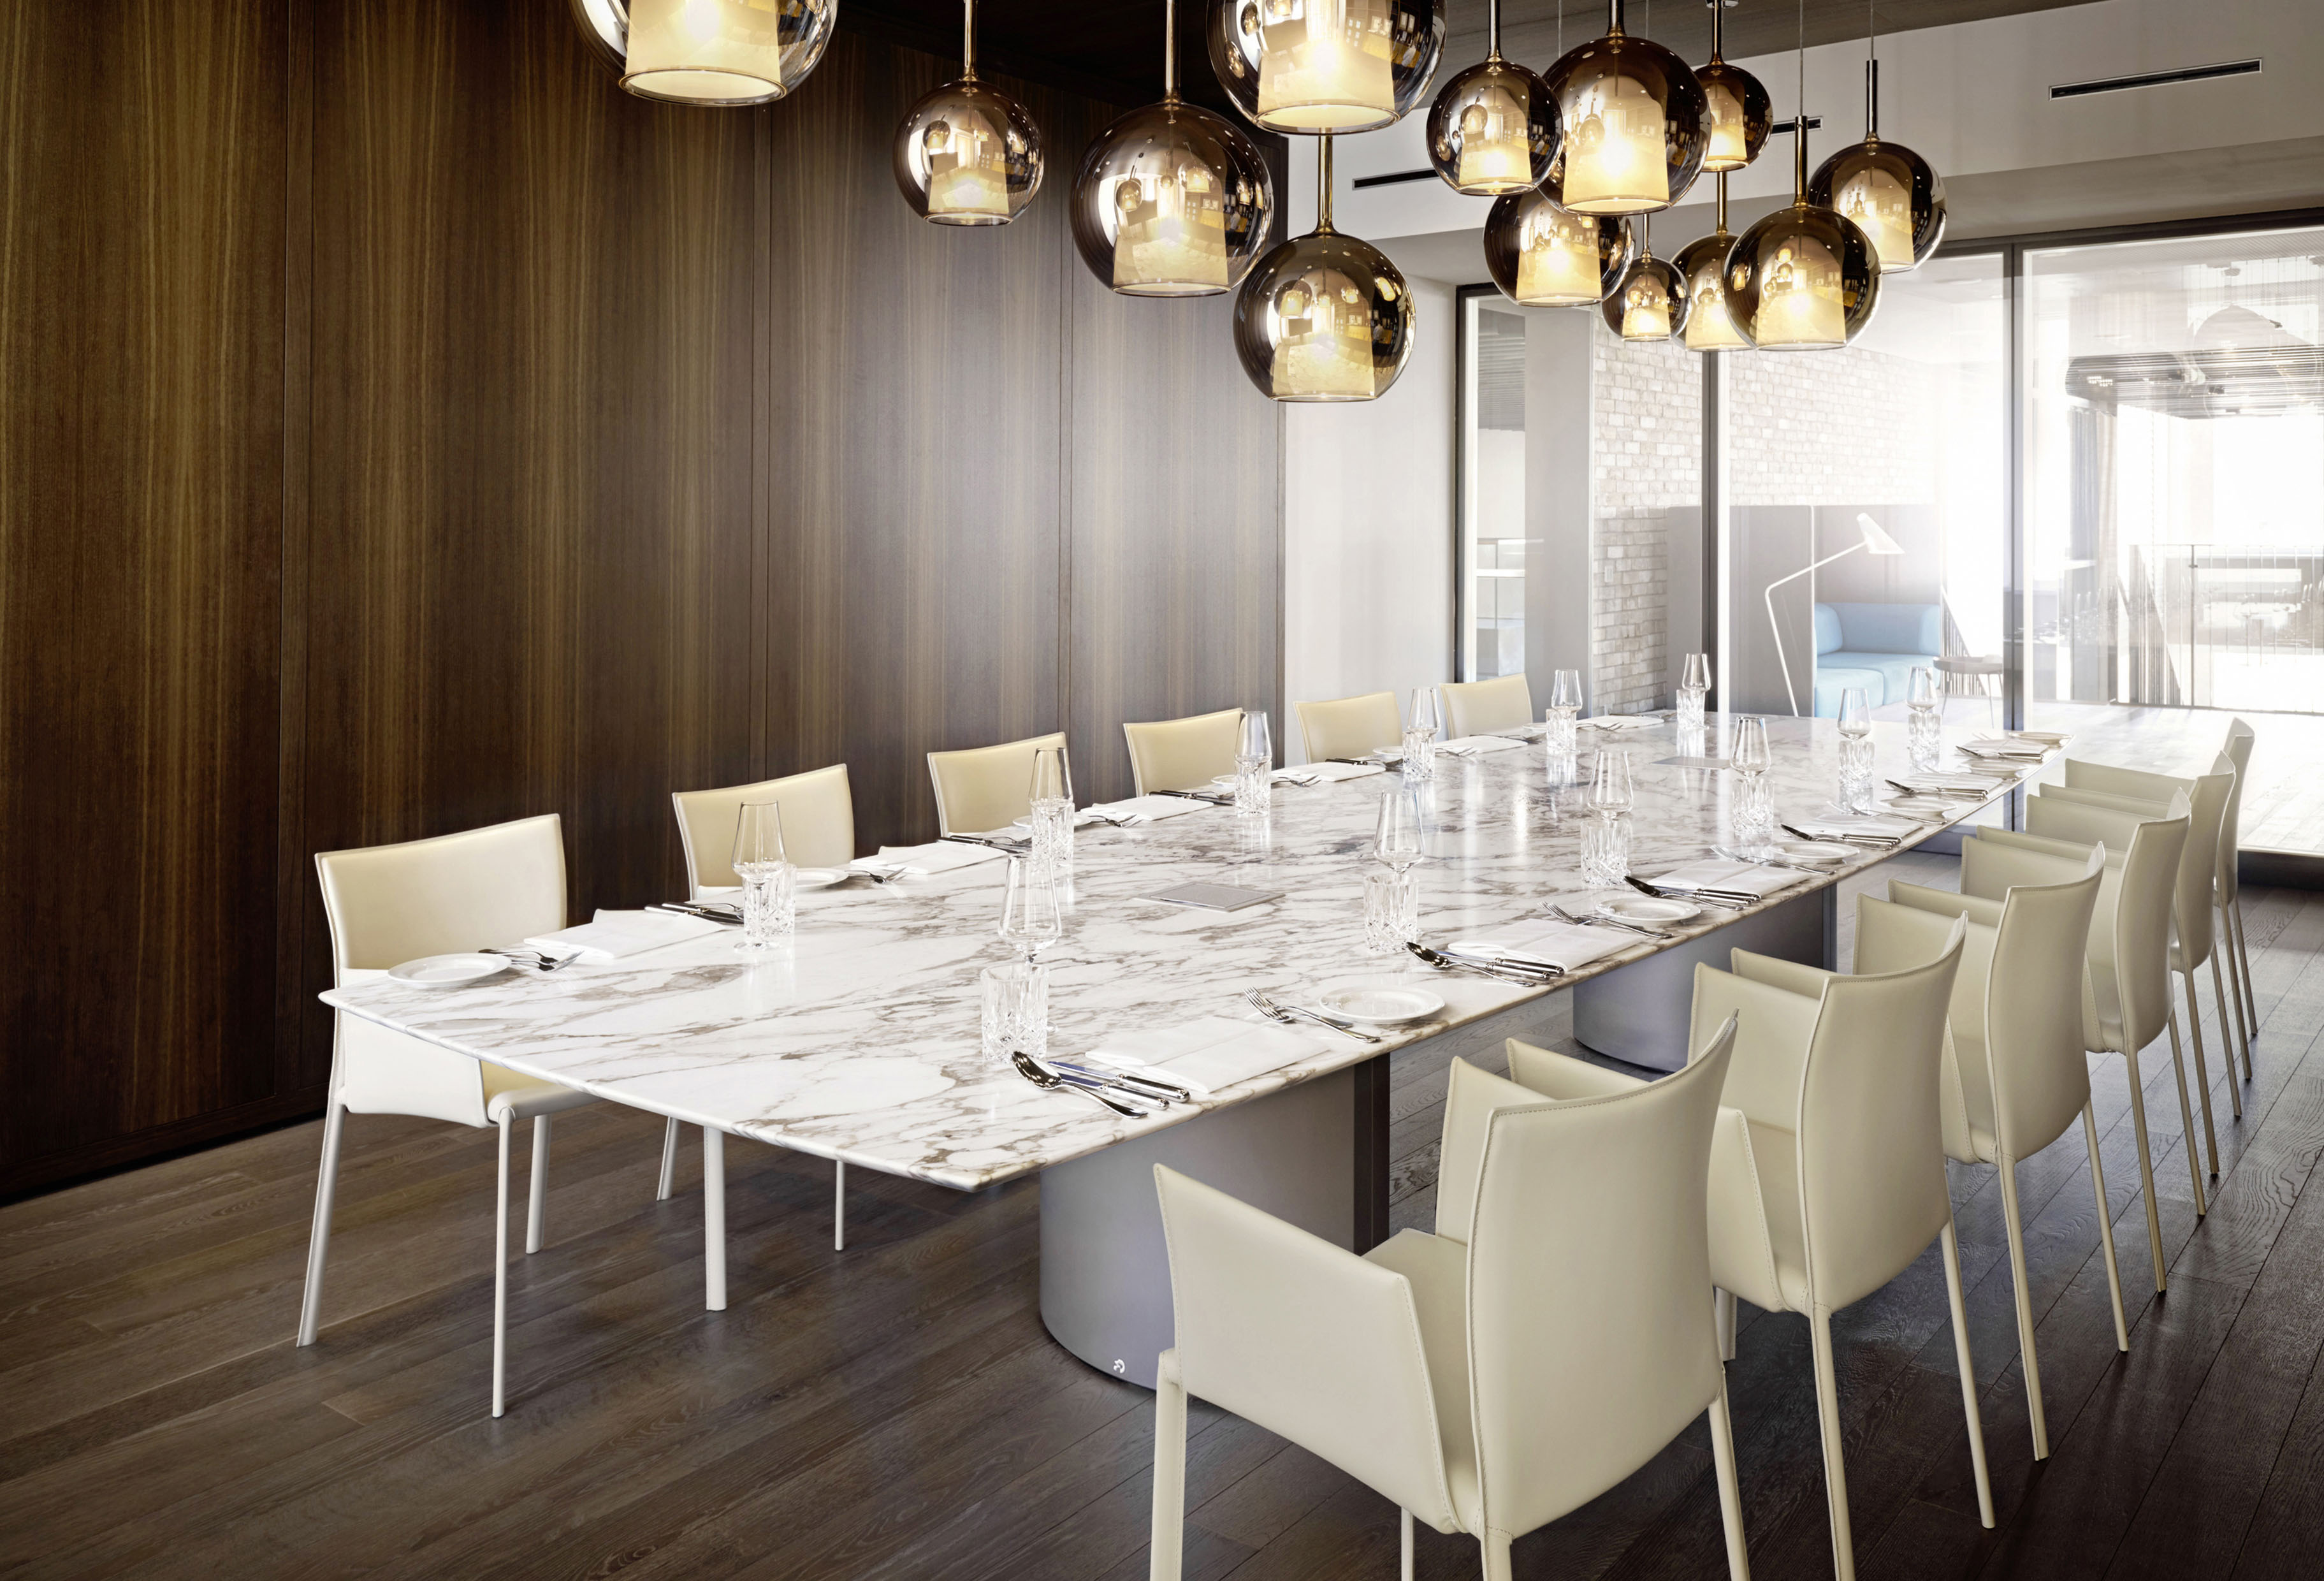 Plüsch Launches Iconic Dining Tables by Draenert